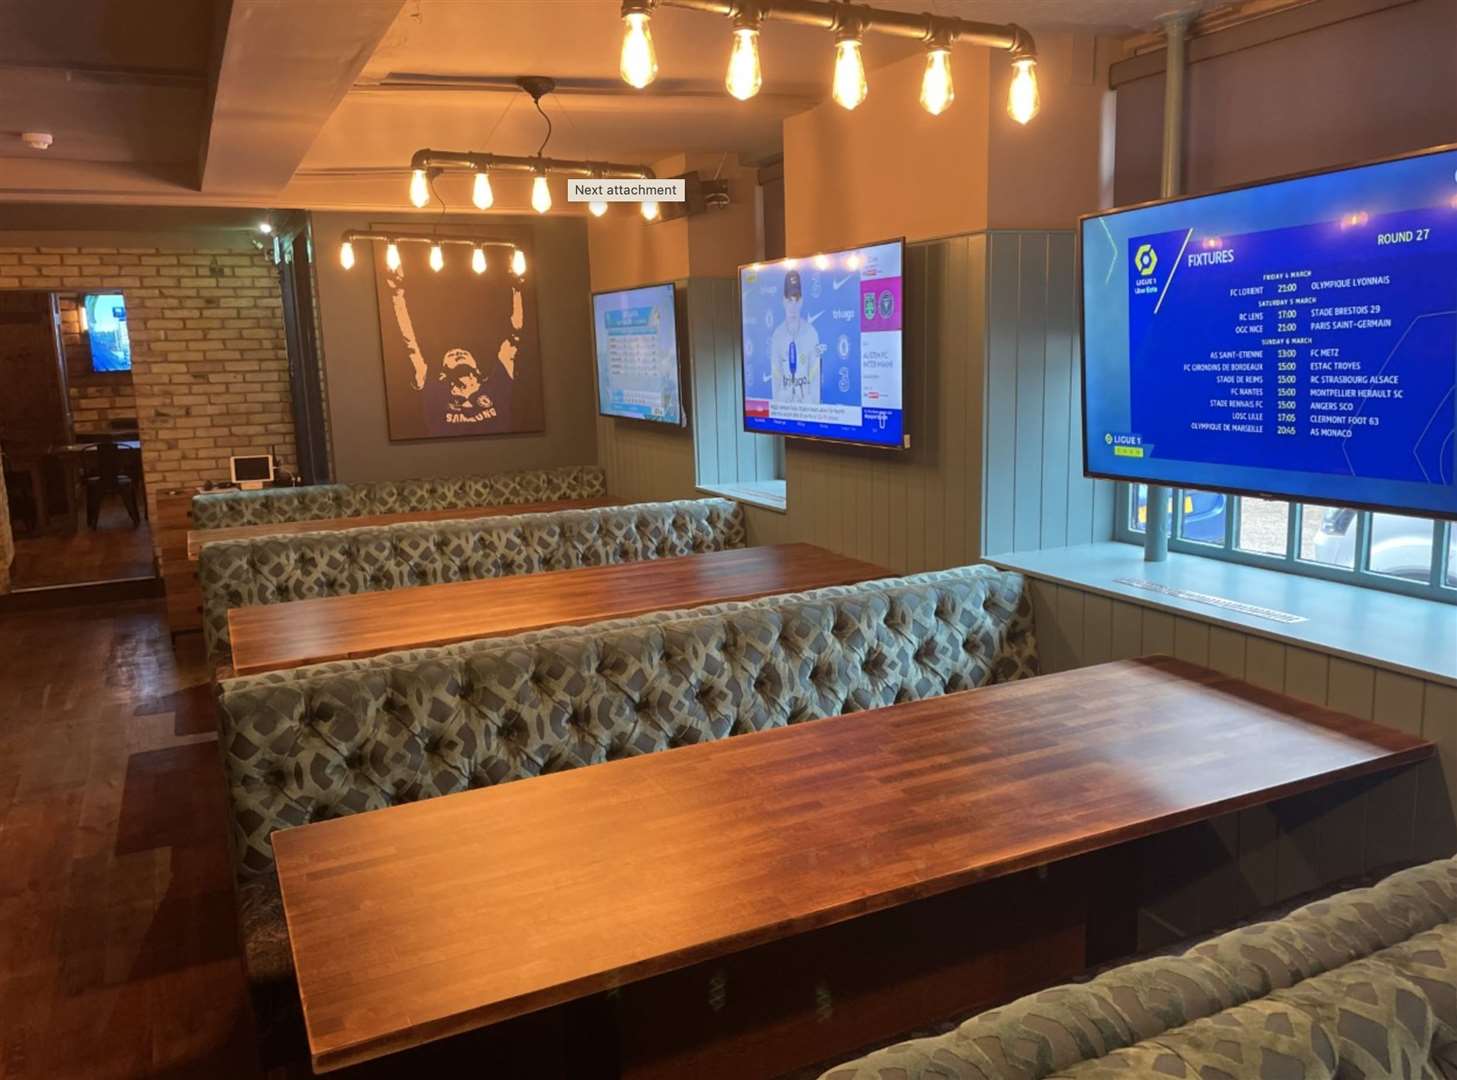 Each booth has individual TV screens and visitors can select which game or channel they want to watch. Picture: Admiral Taverns